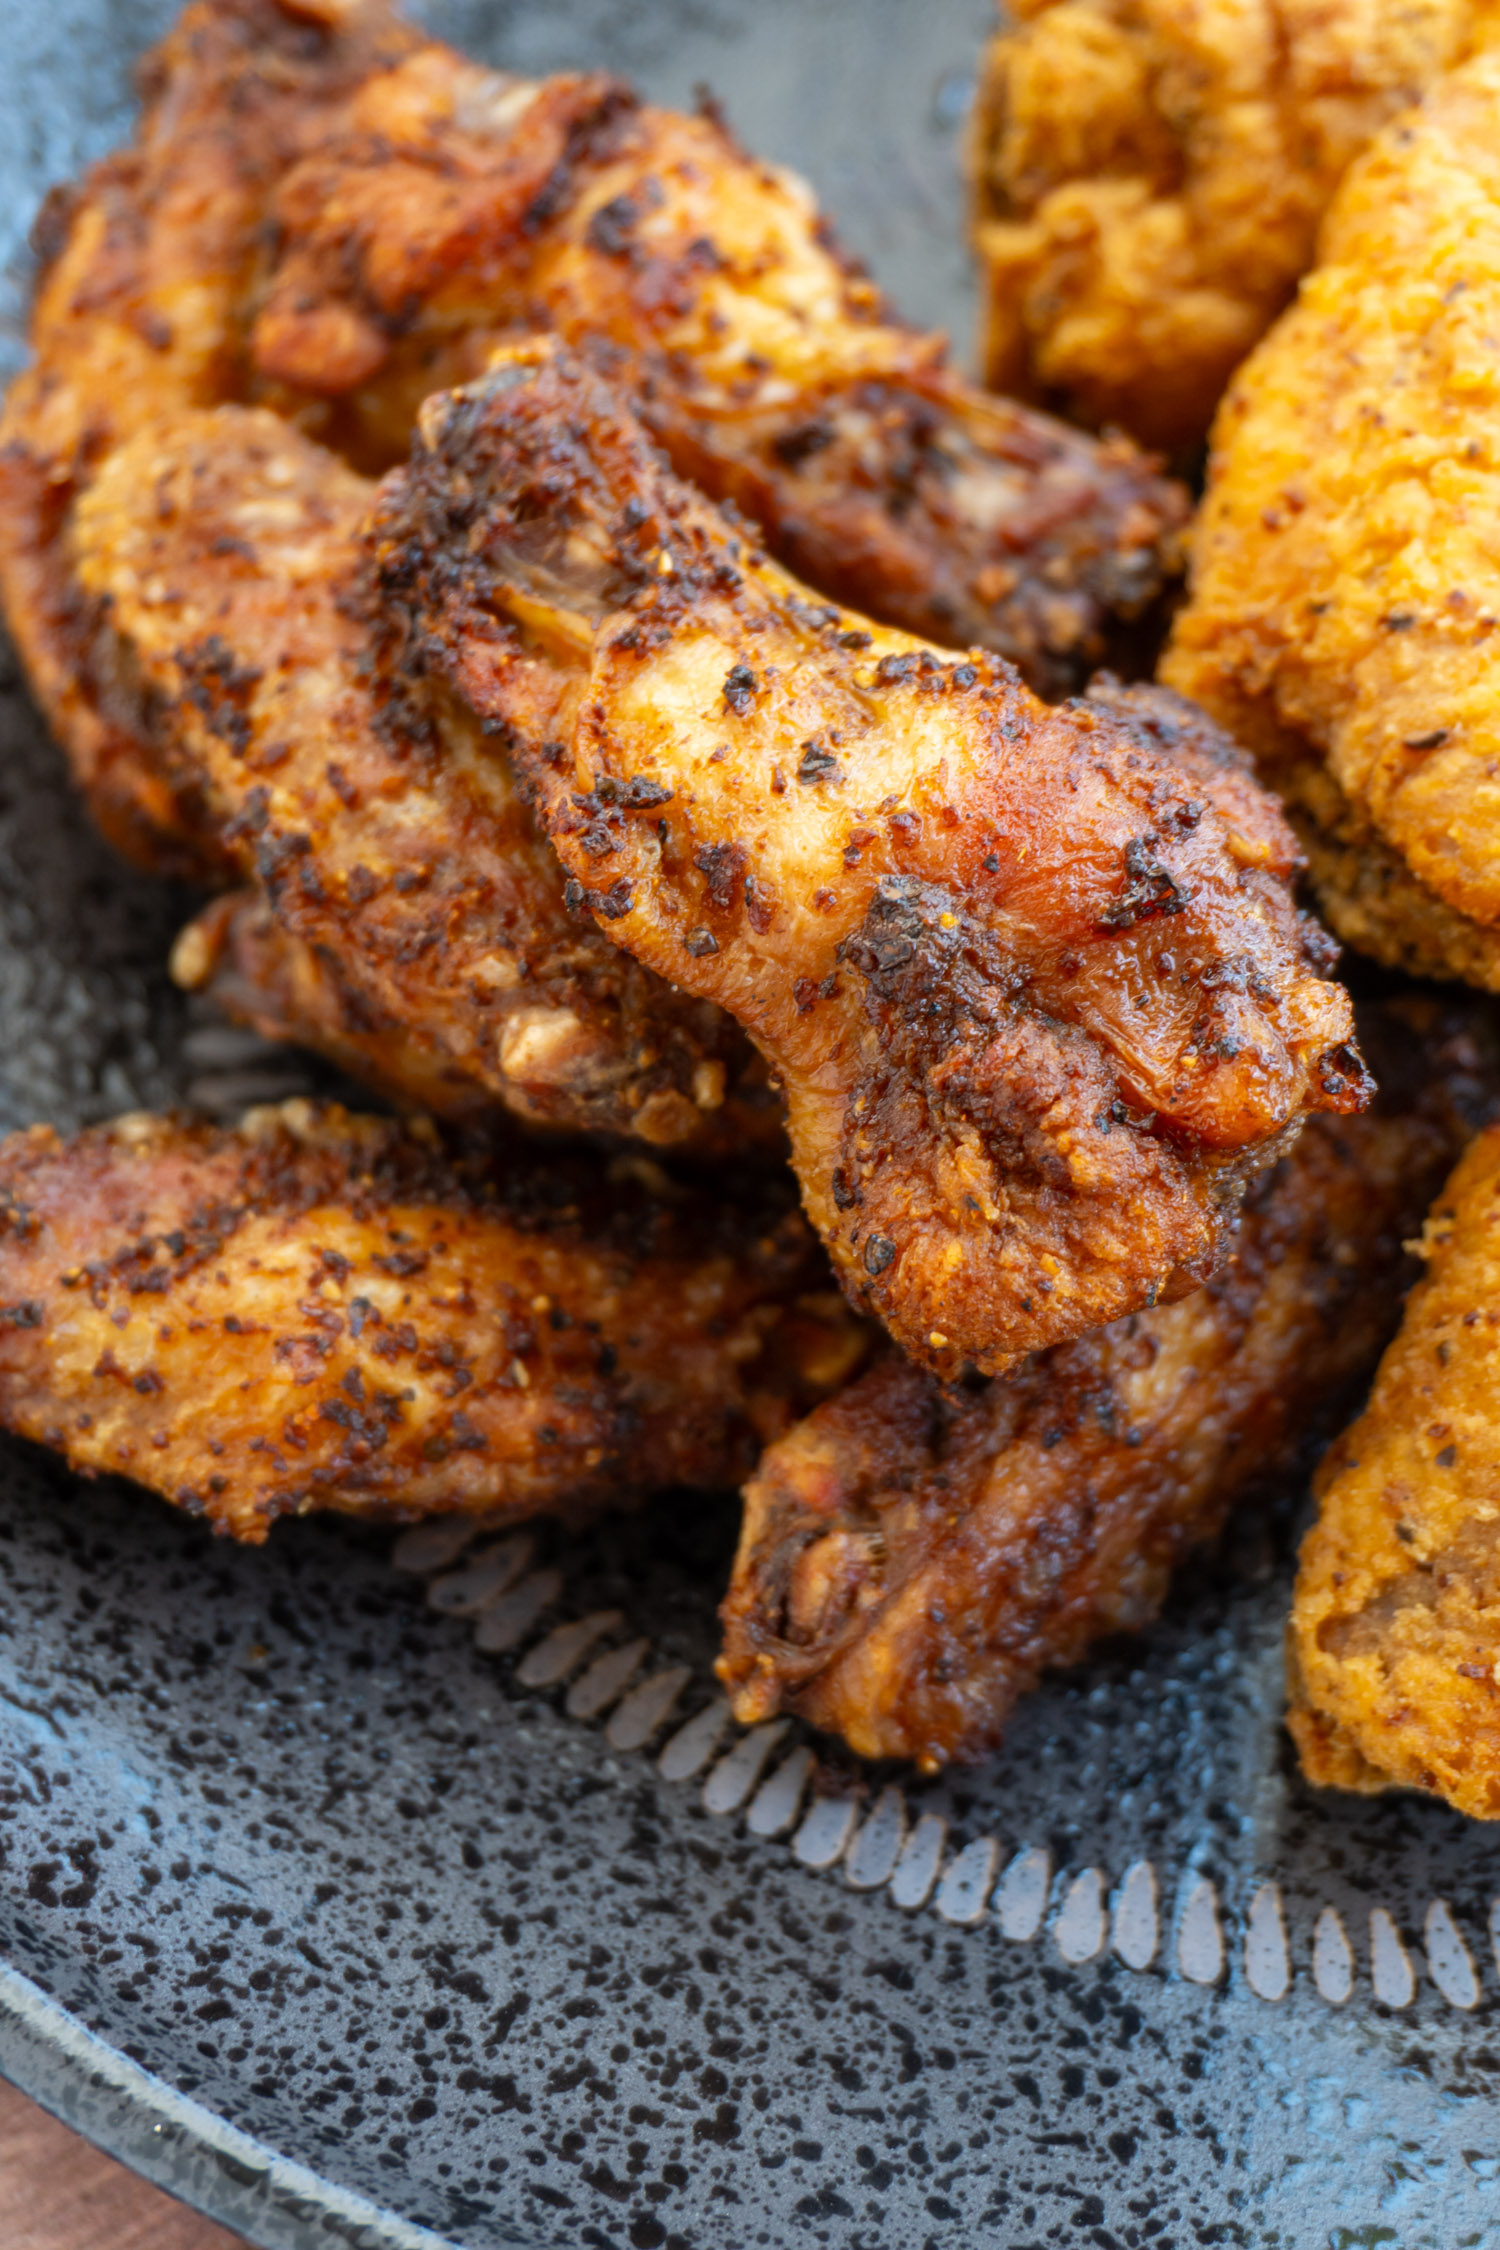 Delicious chicken wings up close, showing the seasoning dry rub.